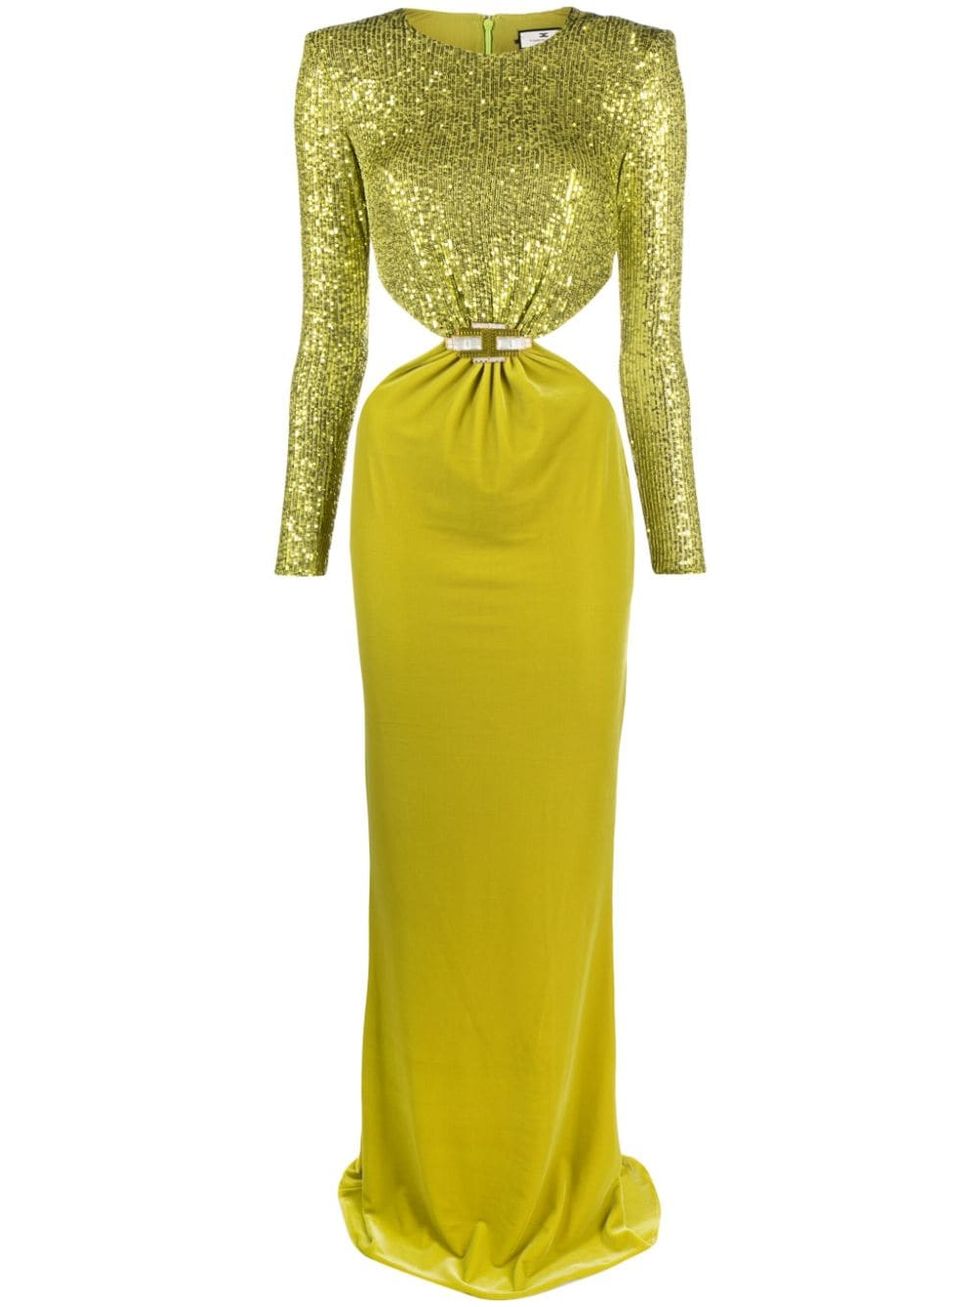 a yellow dress on a mannequin